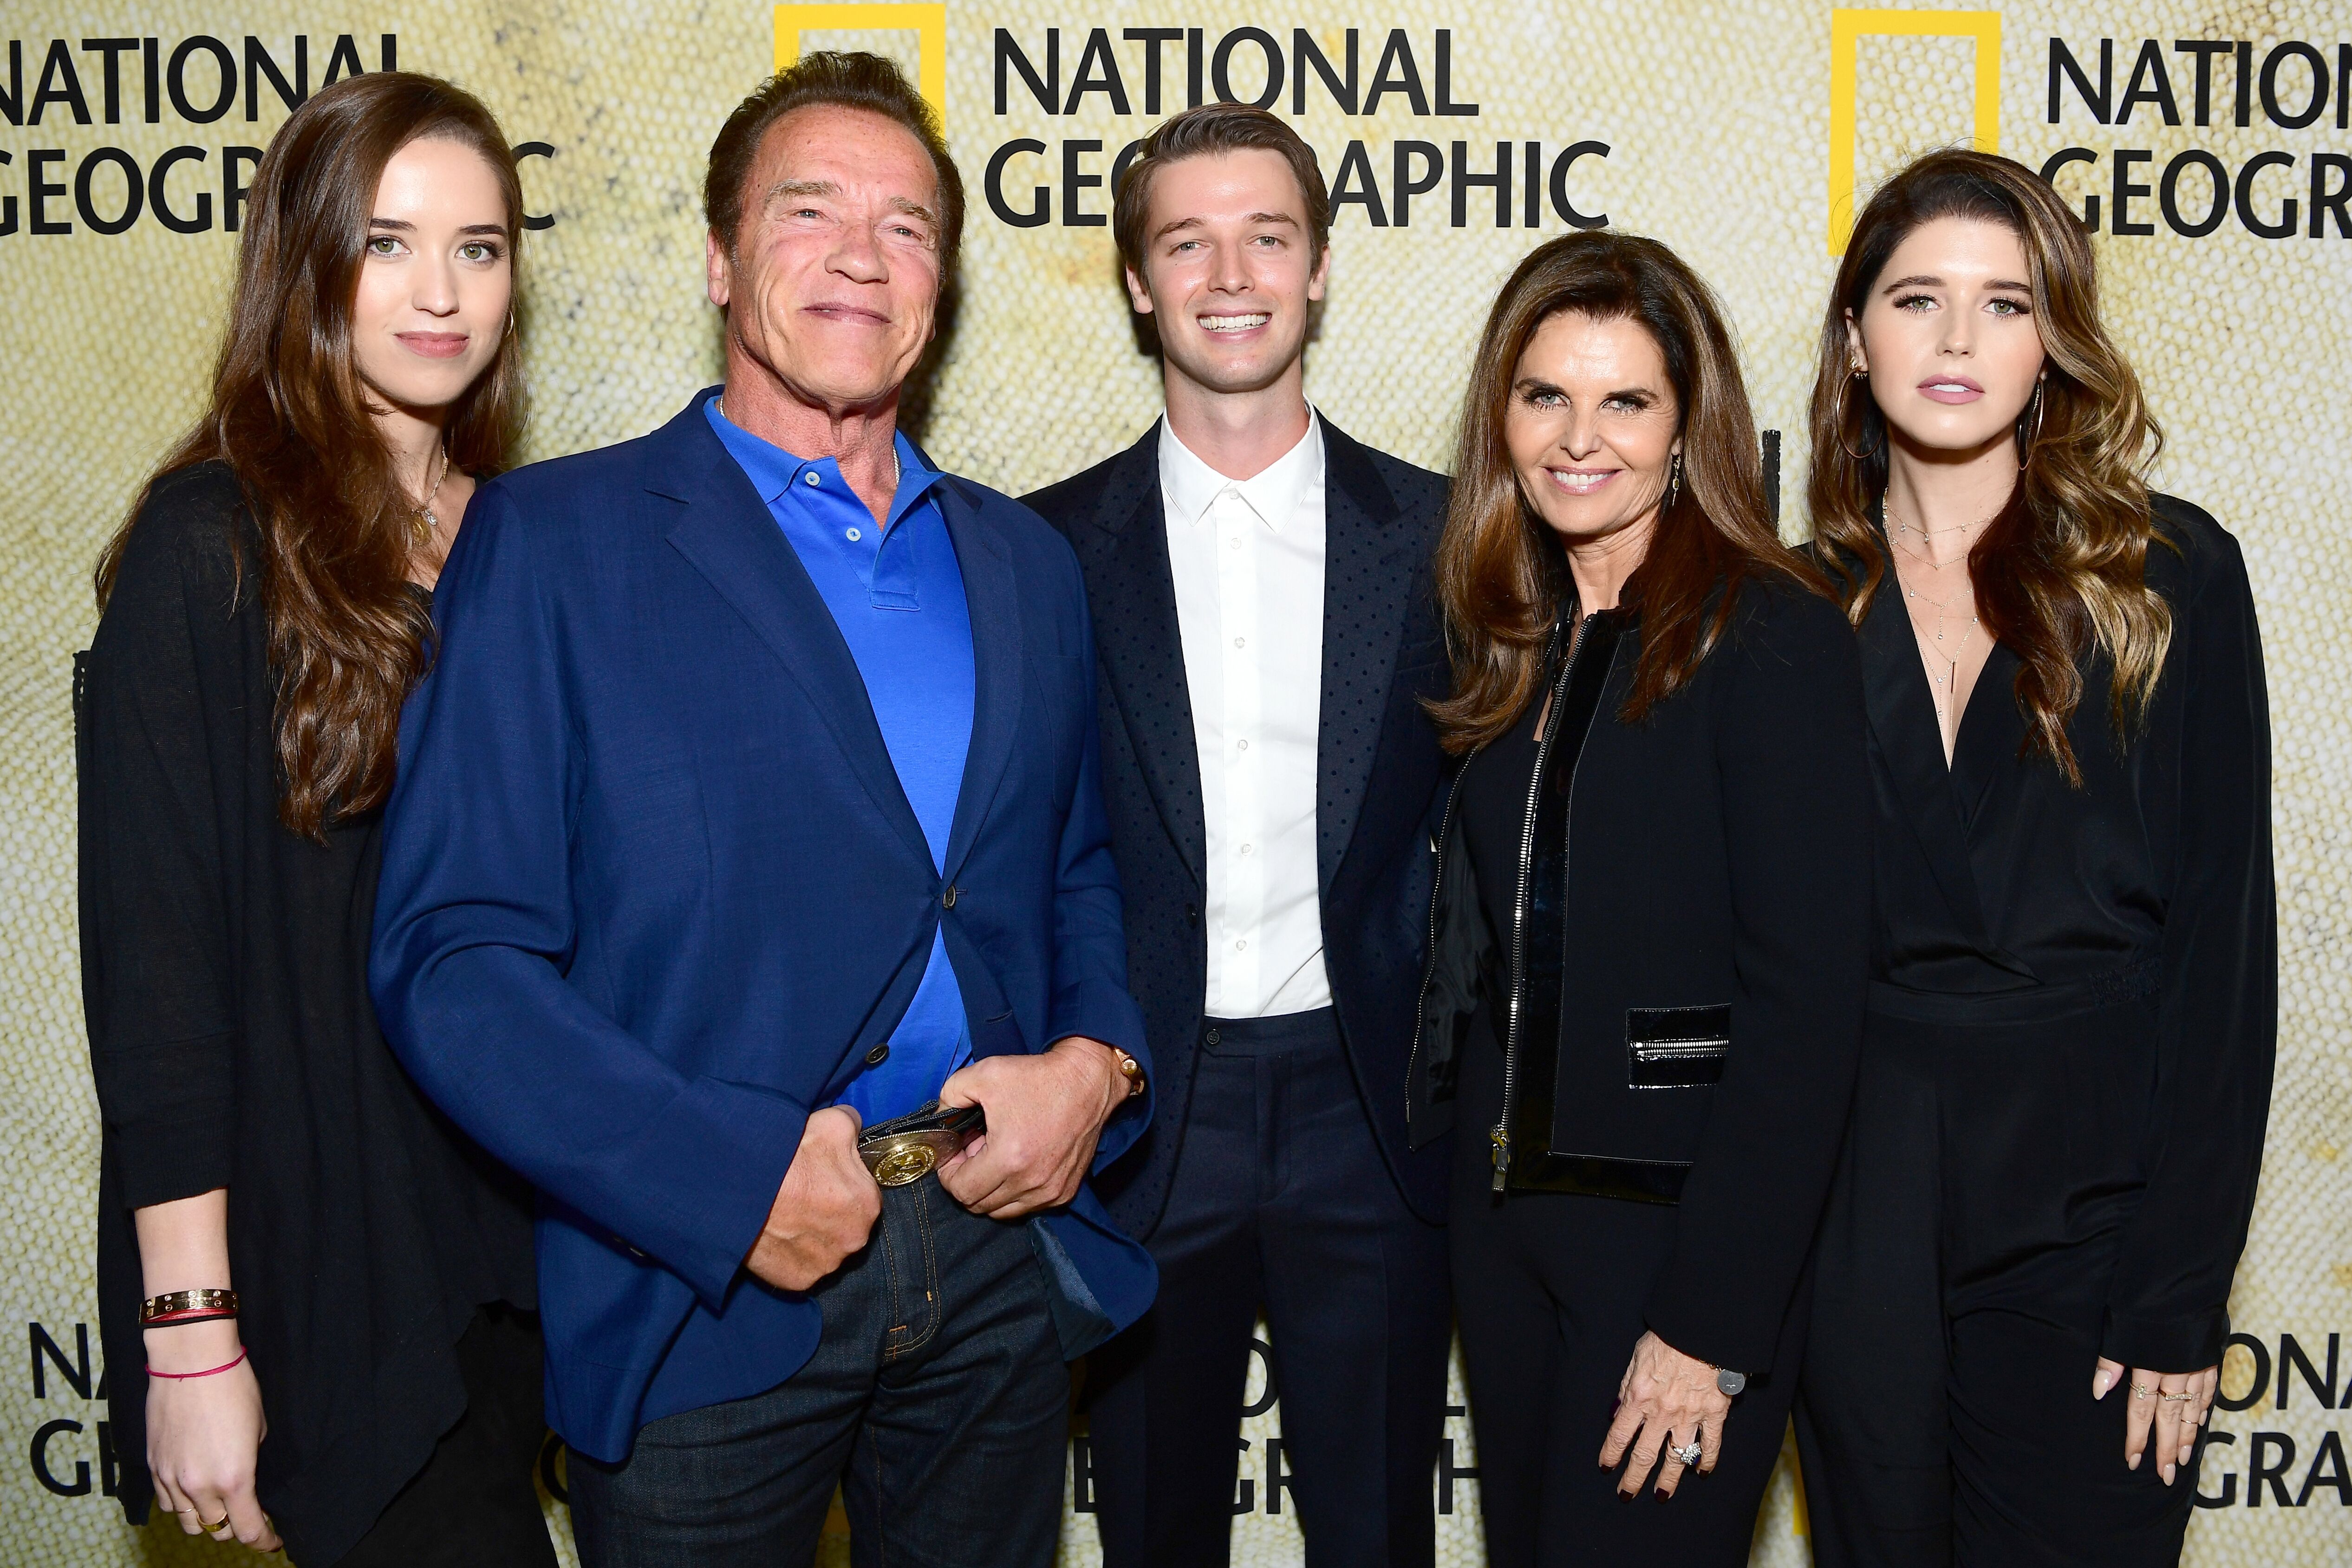 Arnold Schwarzenegger and Maria Shriver attend the premiere of National Geographic's The Long Road Home | Photo: Getty Images